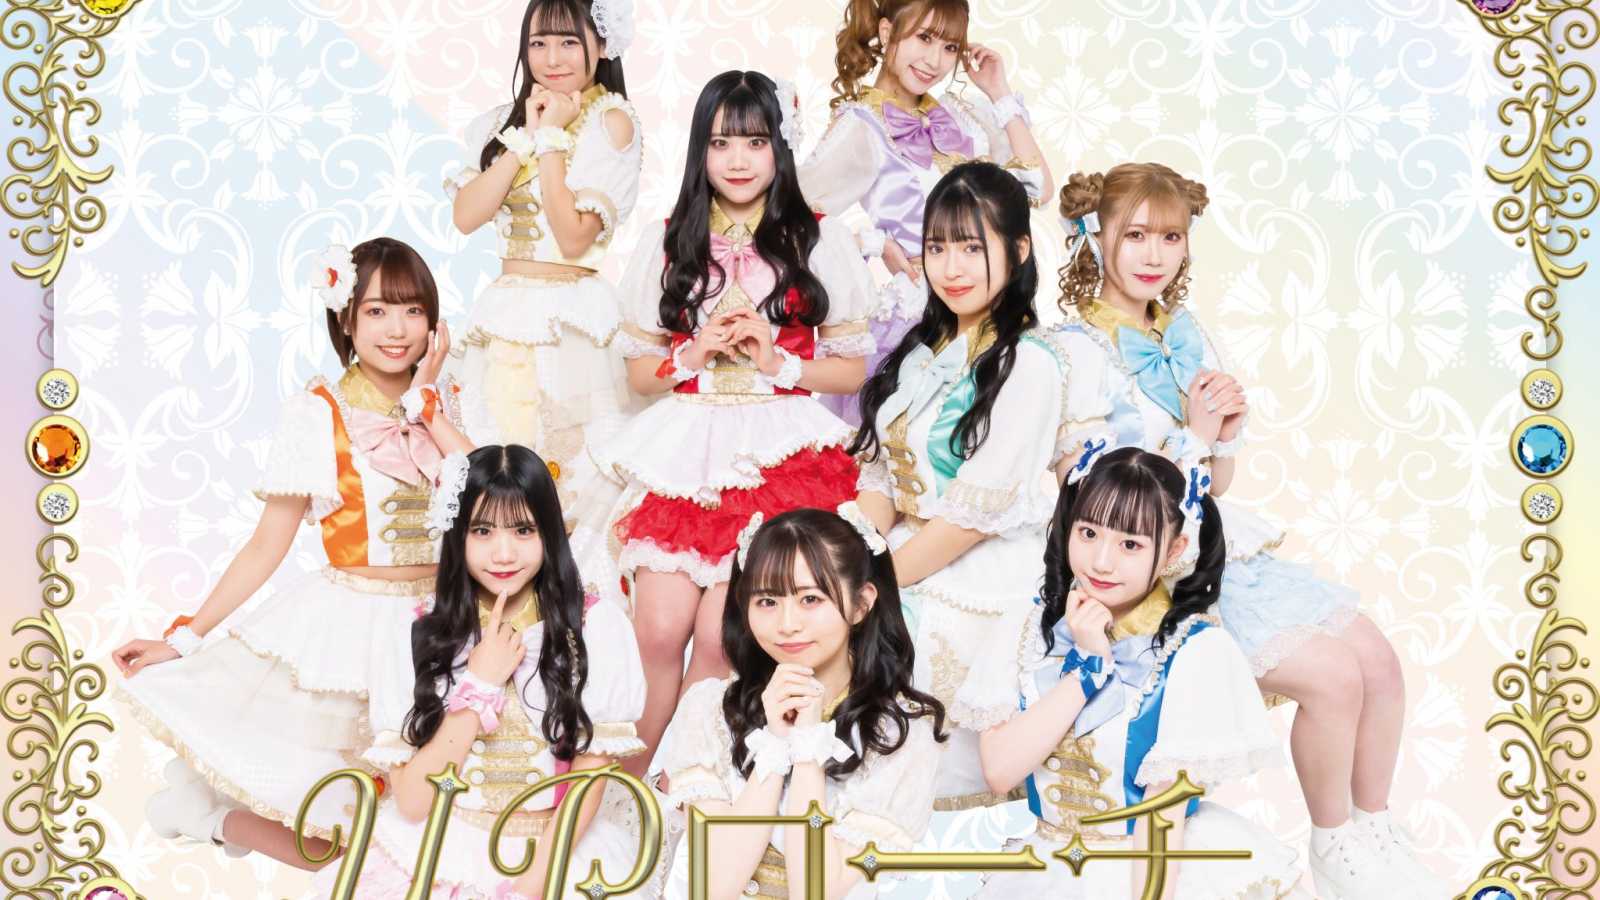 Idol Group UProach mit erster Single im April © plus-p.jp all rights reserved.